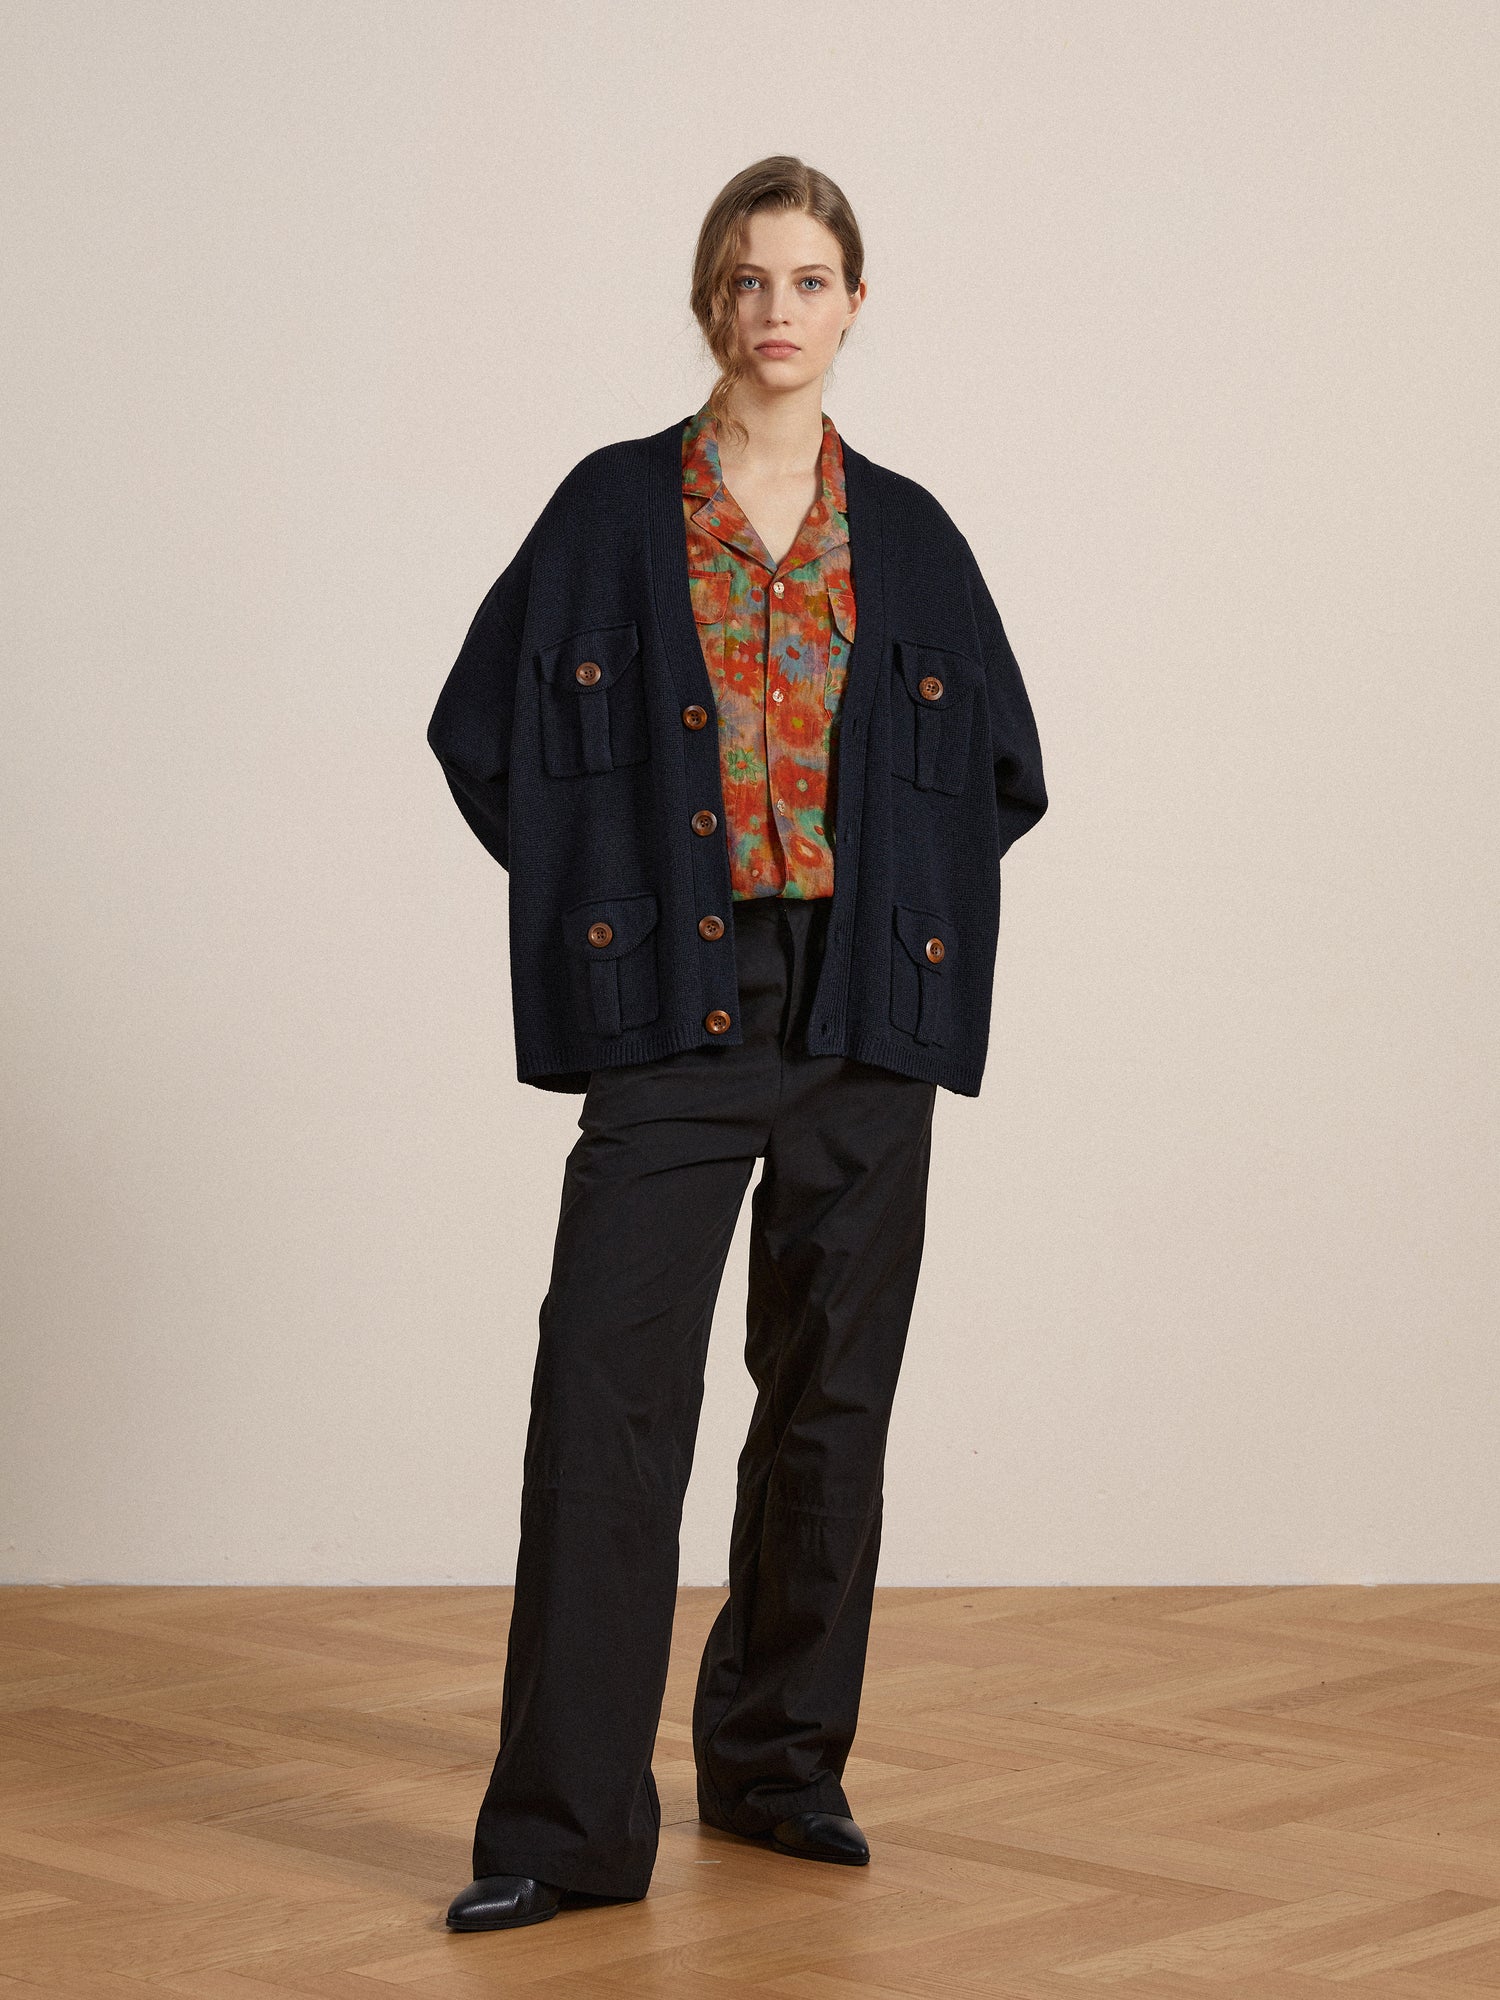 A woman in a stylish oversized navy blue cardigan, colorful blouse, and Found Tencel Pleated Pants, standing in a neutral-toned room.